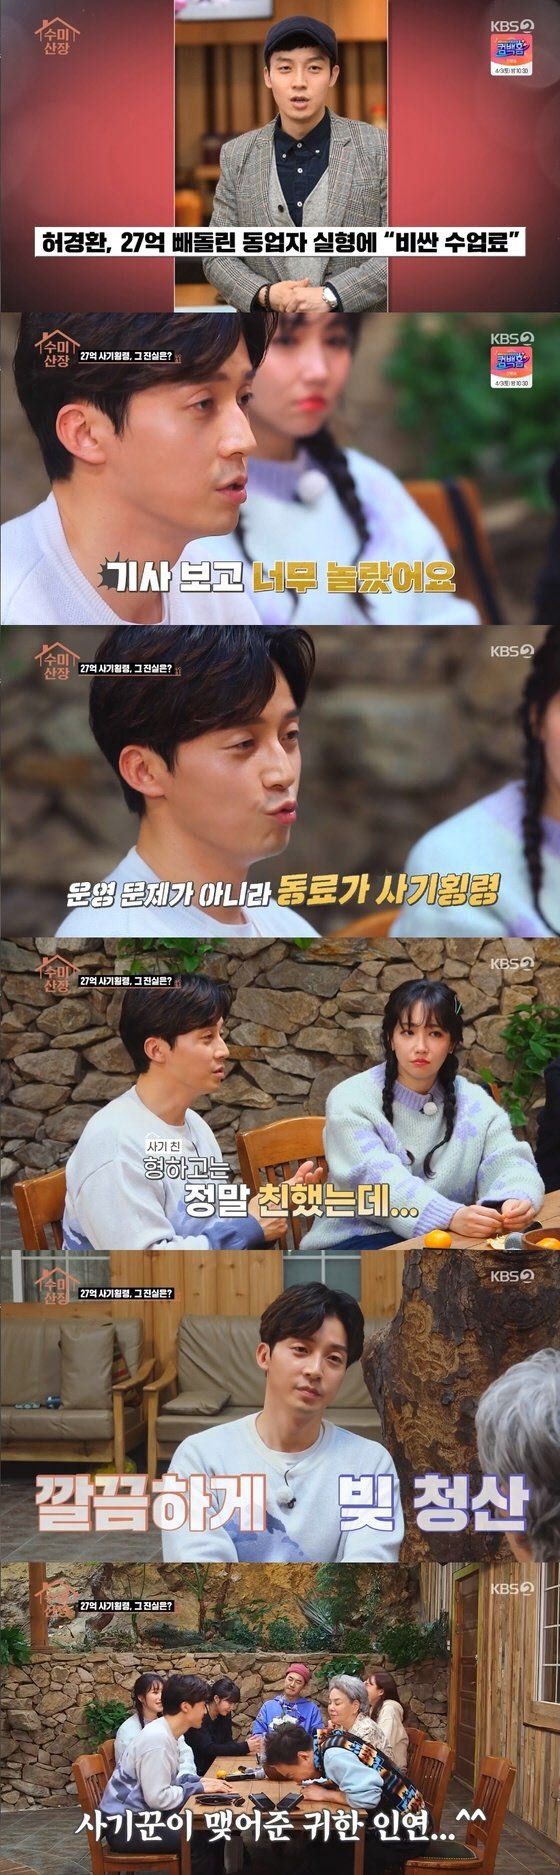 ‘Sumi Lodge’ Heo Gyeong-hwan mentions the damage of 2.7 billion fraud and embezzlement…  “Pay all your current debts”